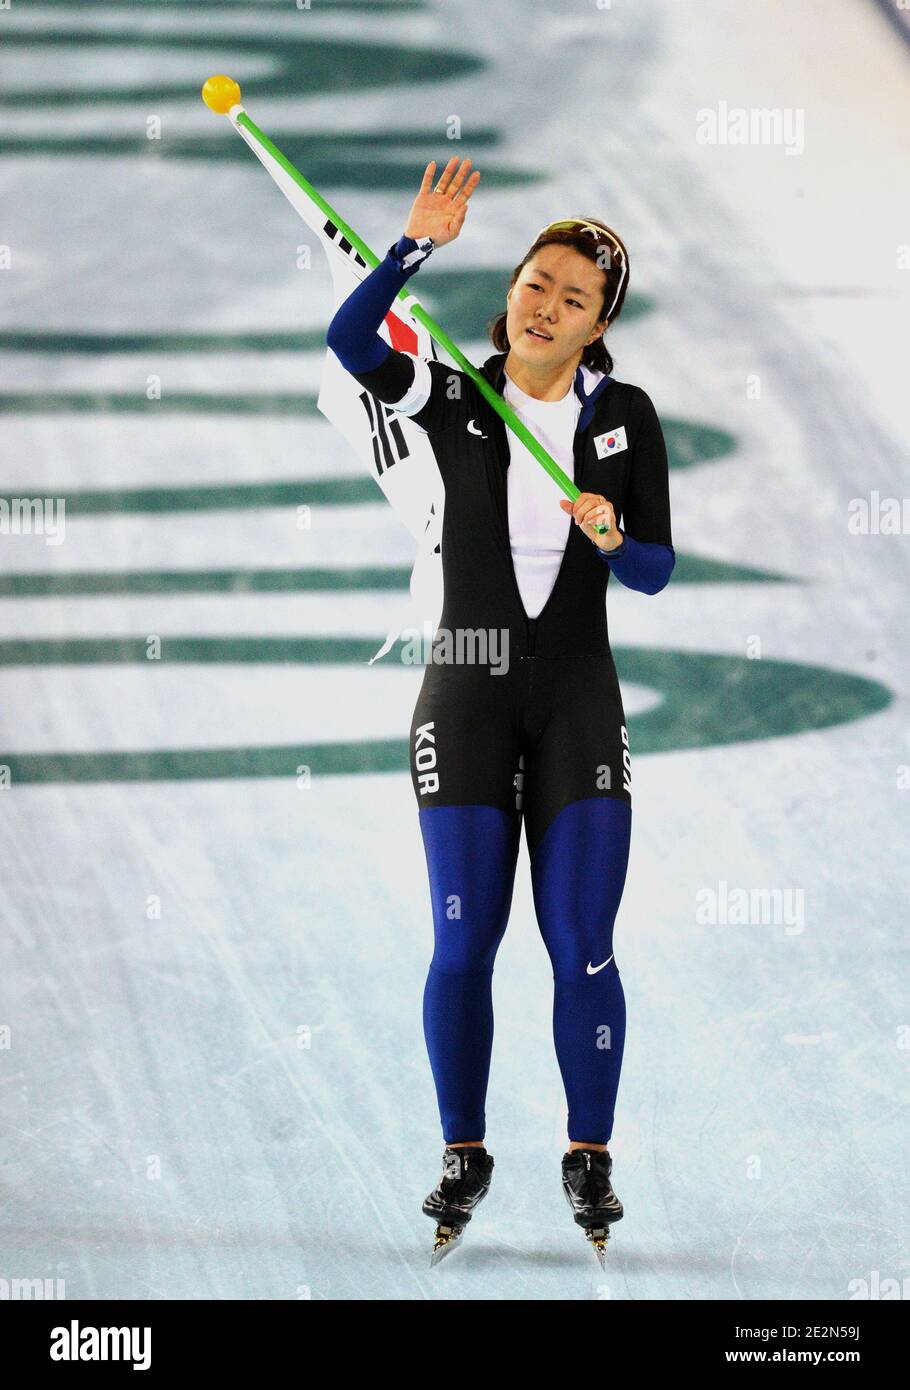 Lee Sang-Hwa of South Korea reacts after winning the gold at the women's  speed skating 500 m during the Vancouver 2010 Winter Olympics at Richmond  Olympic Oval on February 16, 2010 in